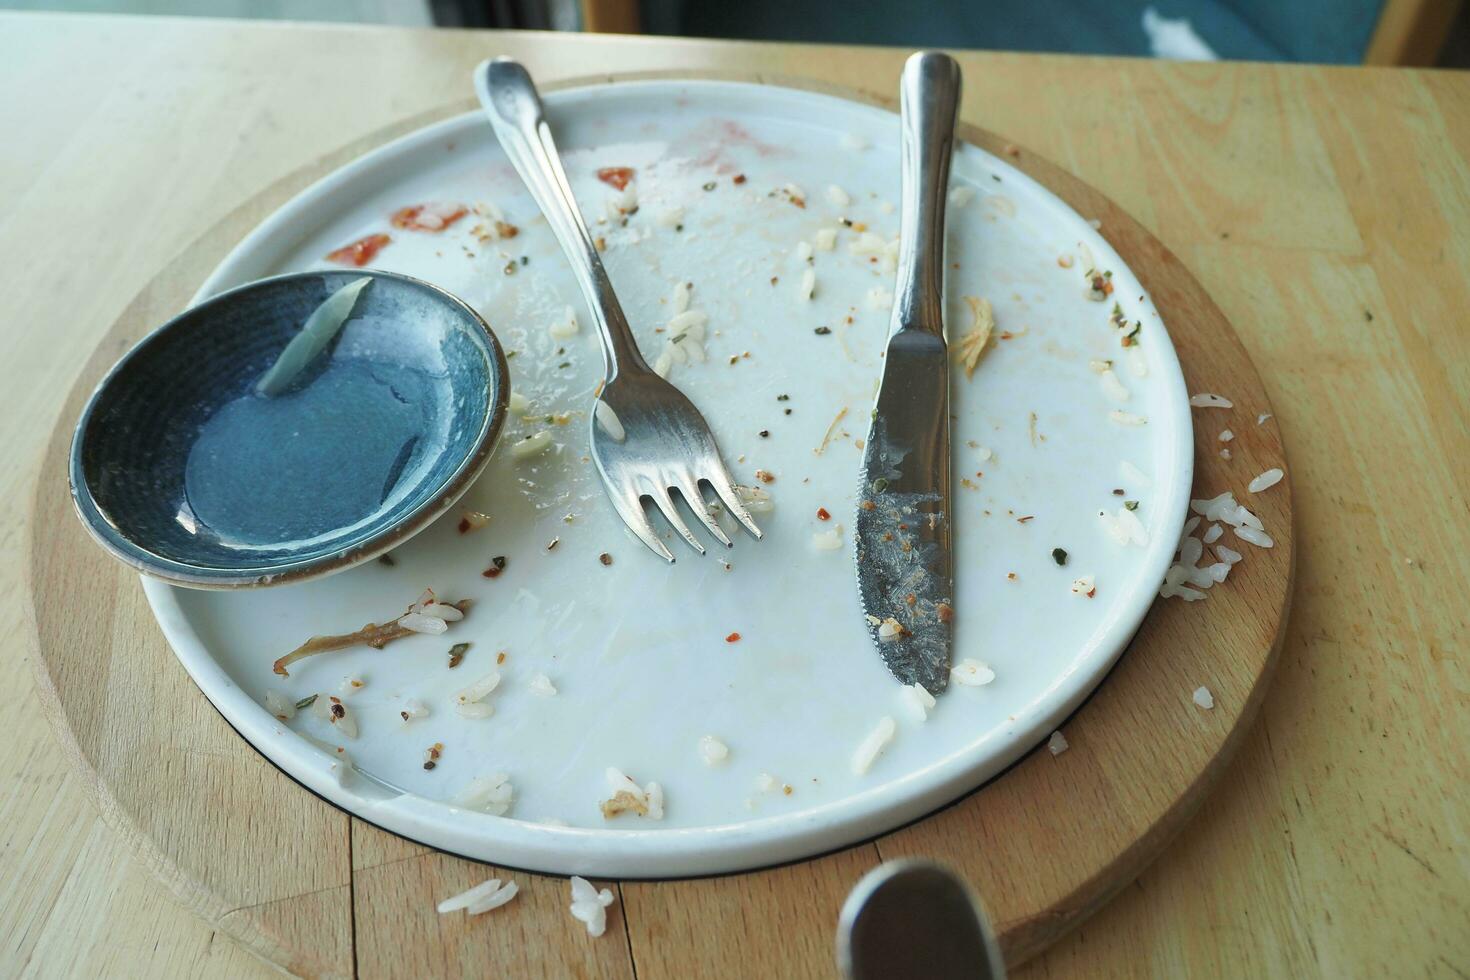 Empty plate after eating on table photo